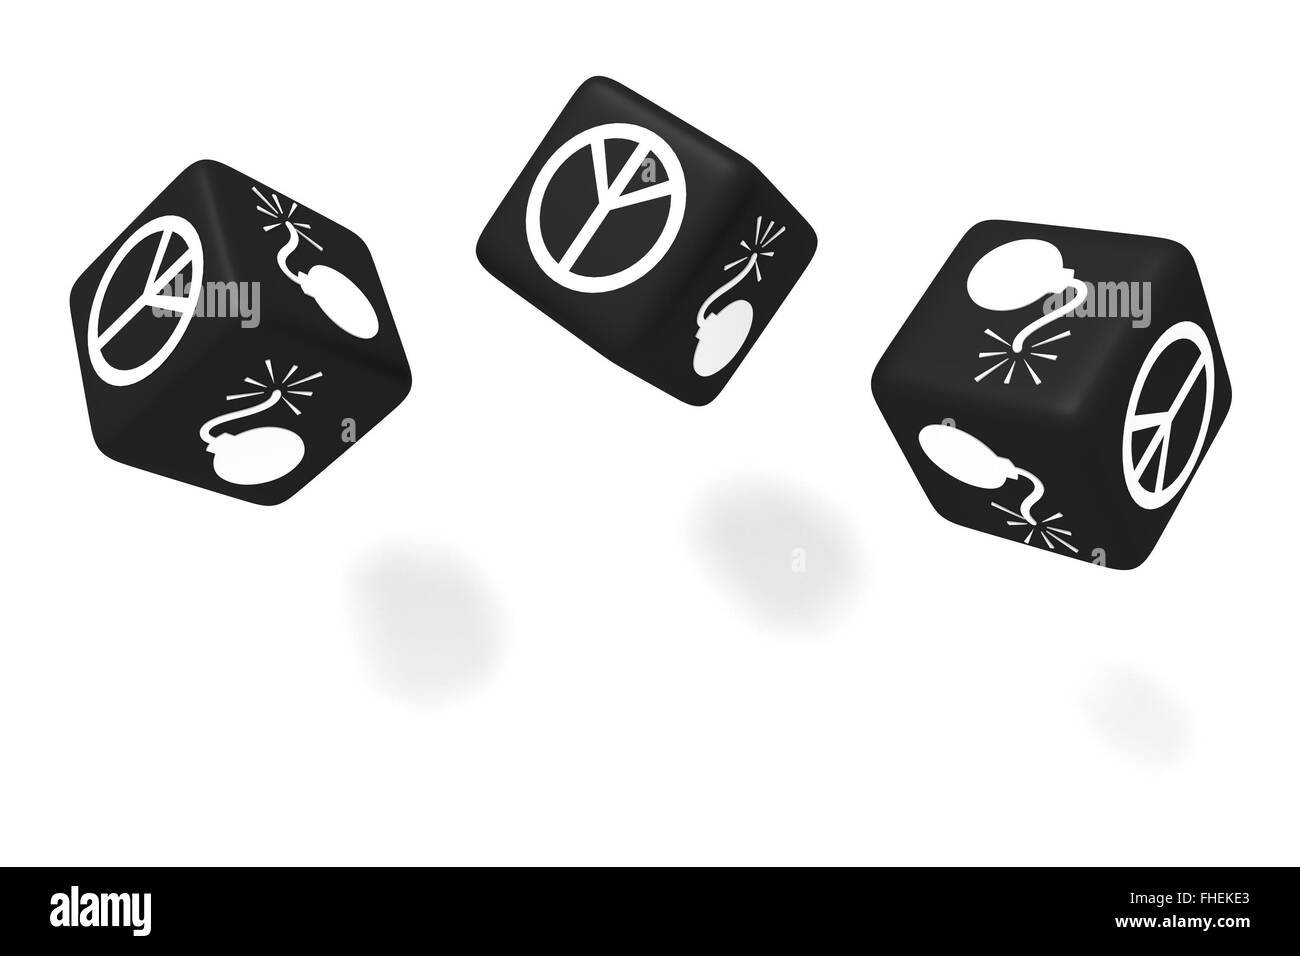 War or Peace: black dice on a white background Stock Photo